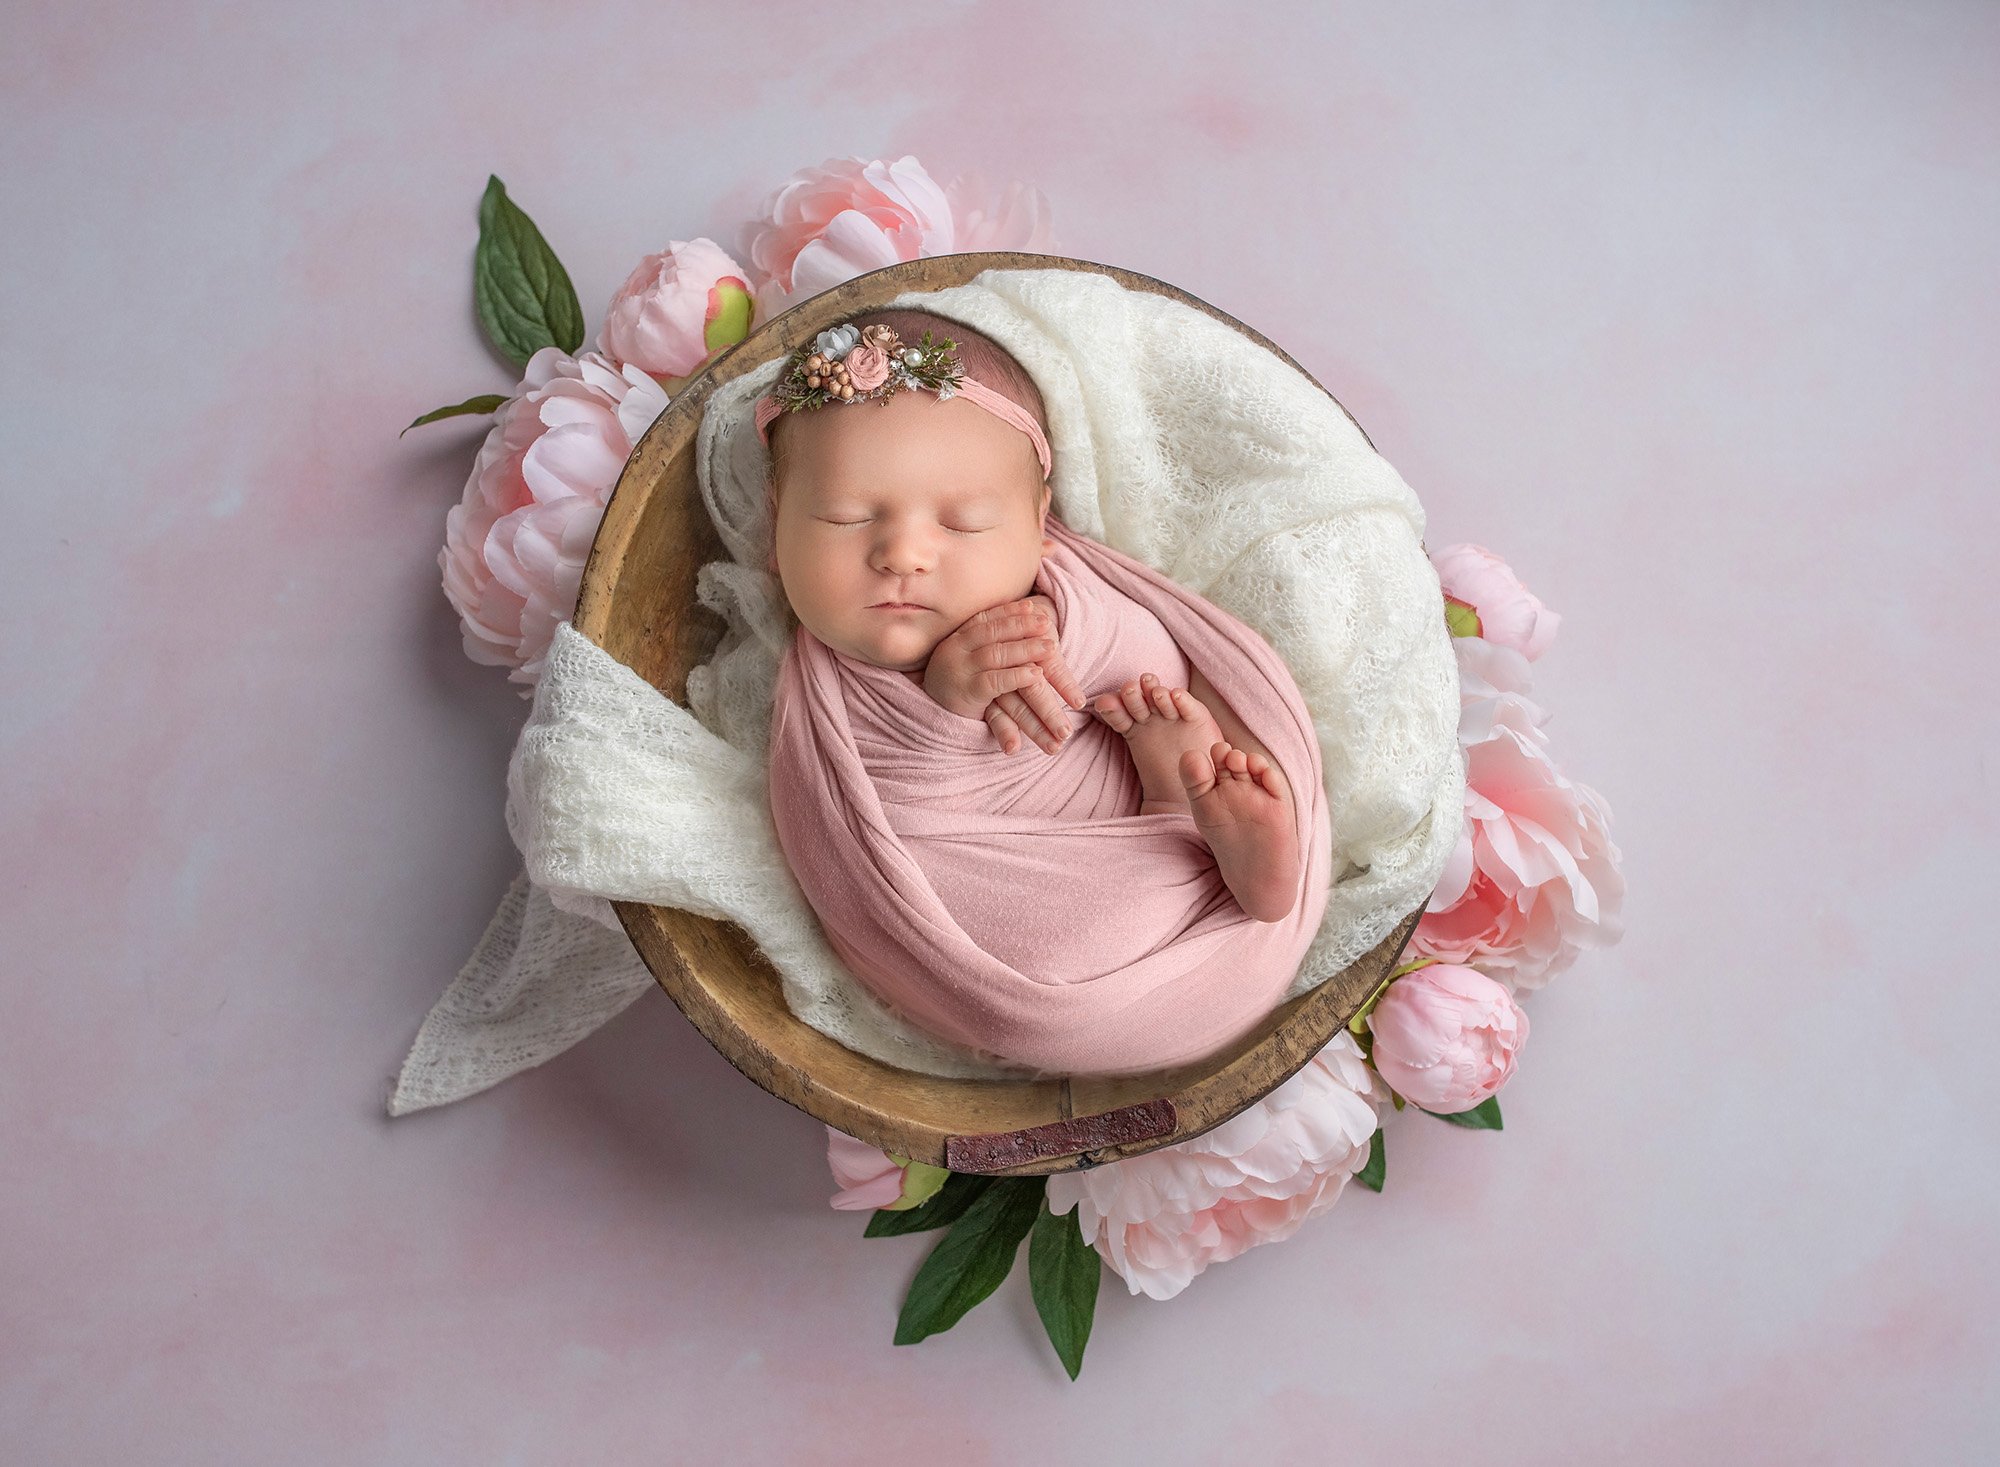 swaddled newborn pictures newborn baby girl asleep in pink wrap laying in wooden bowl surrounded by pink peonies